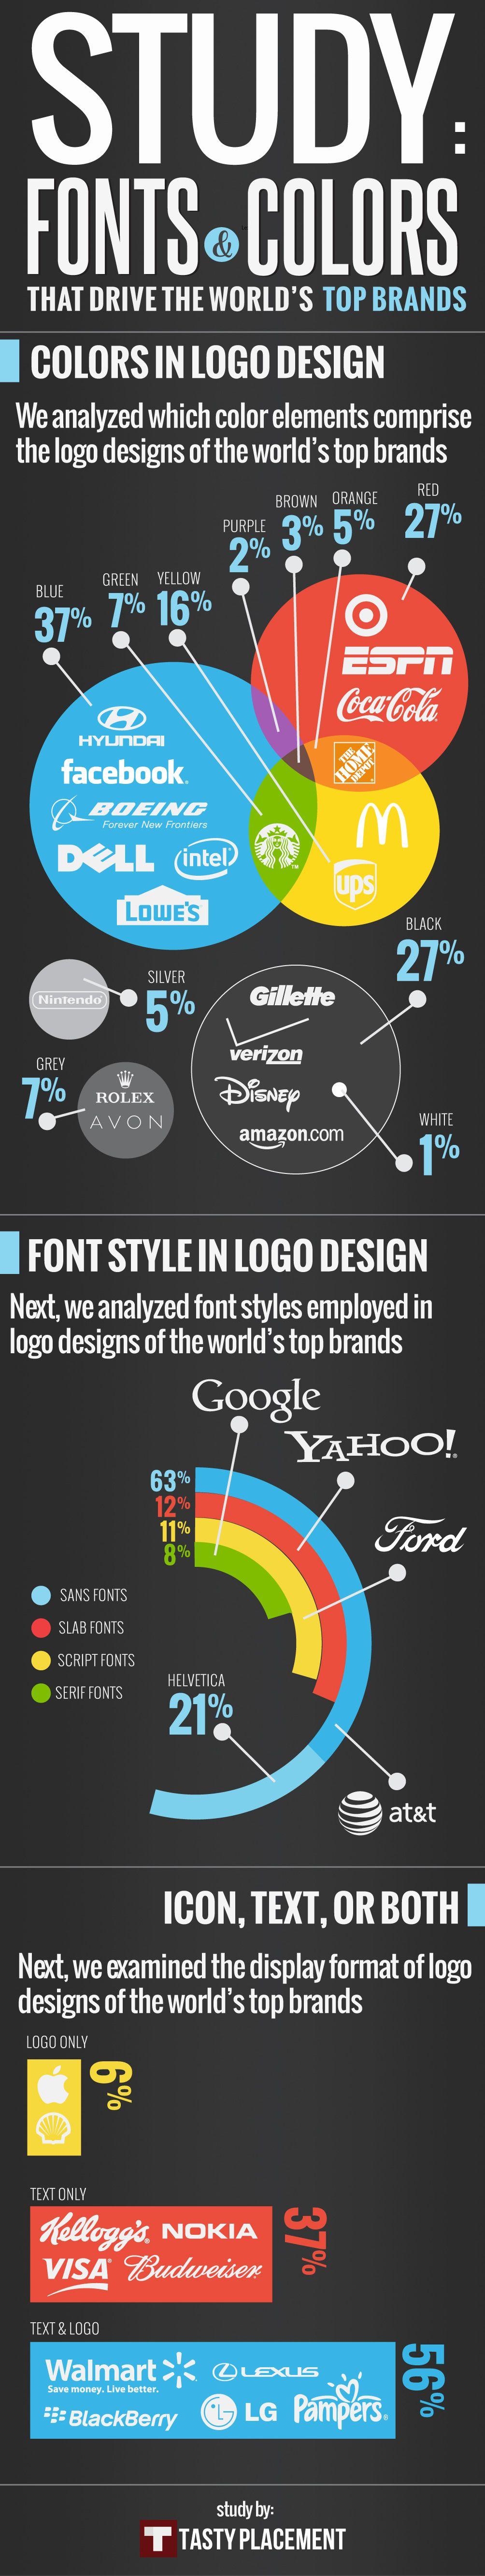 Top Colors for Logo - Fonts & Colors That Drive the World's Top Brands